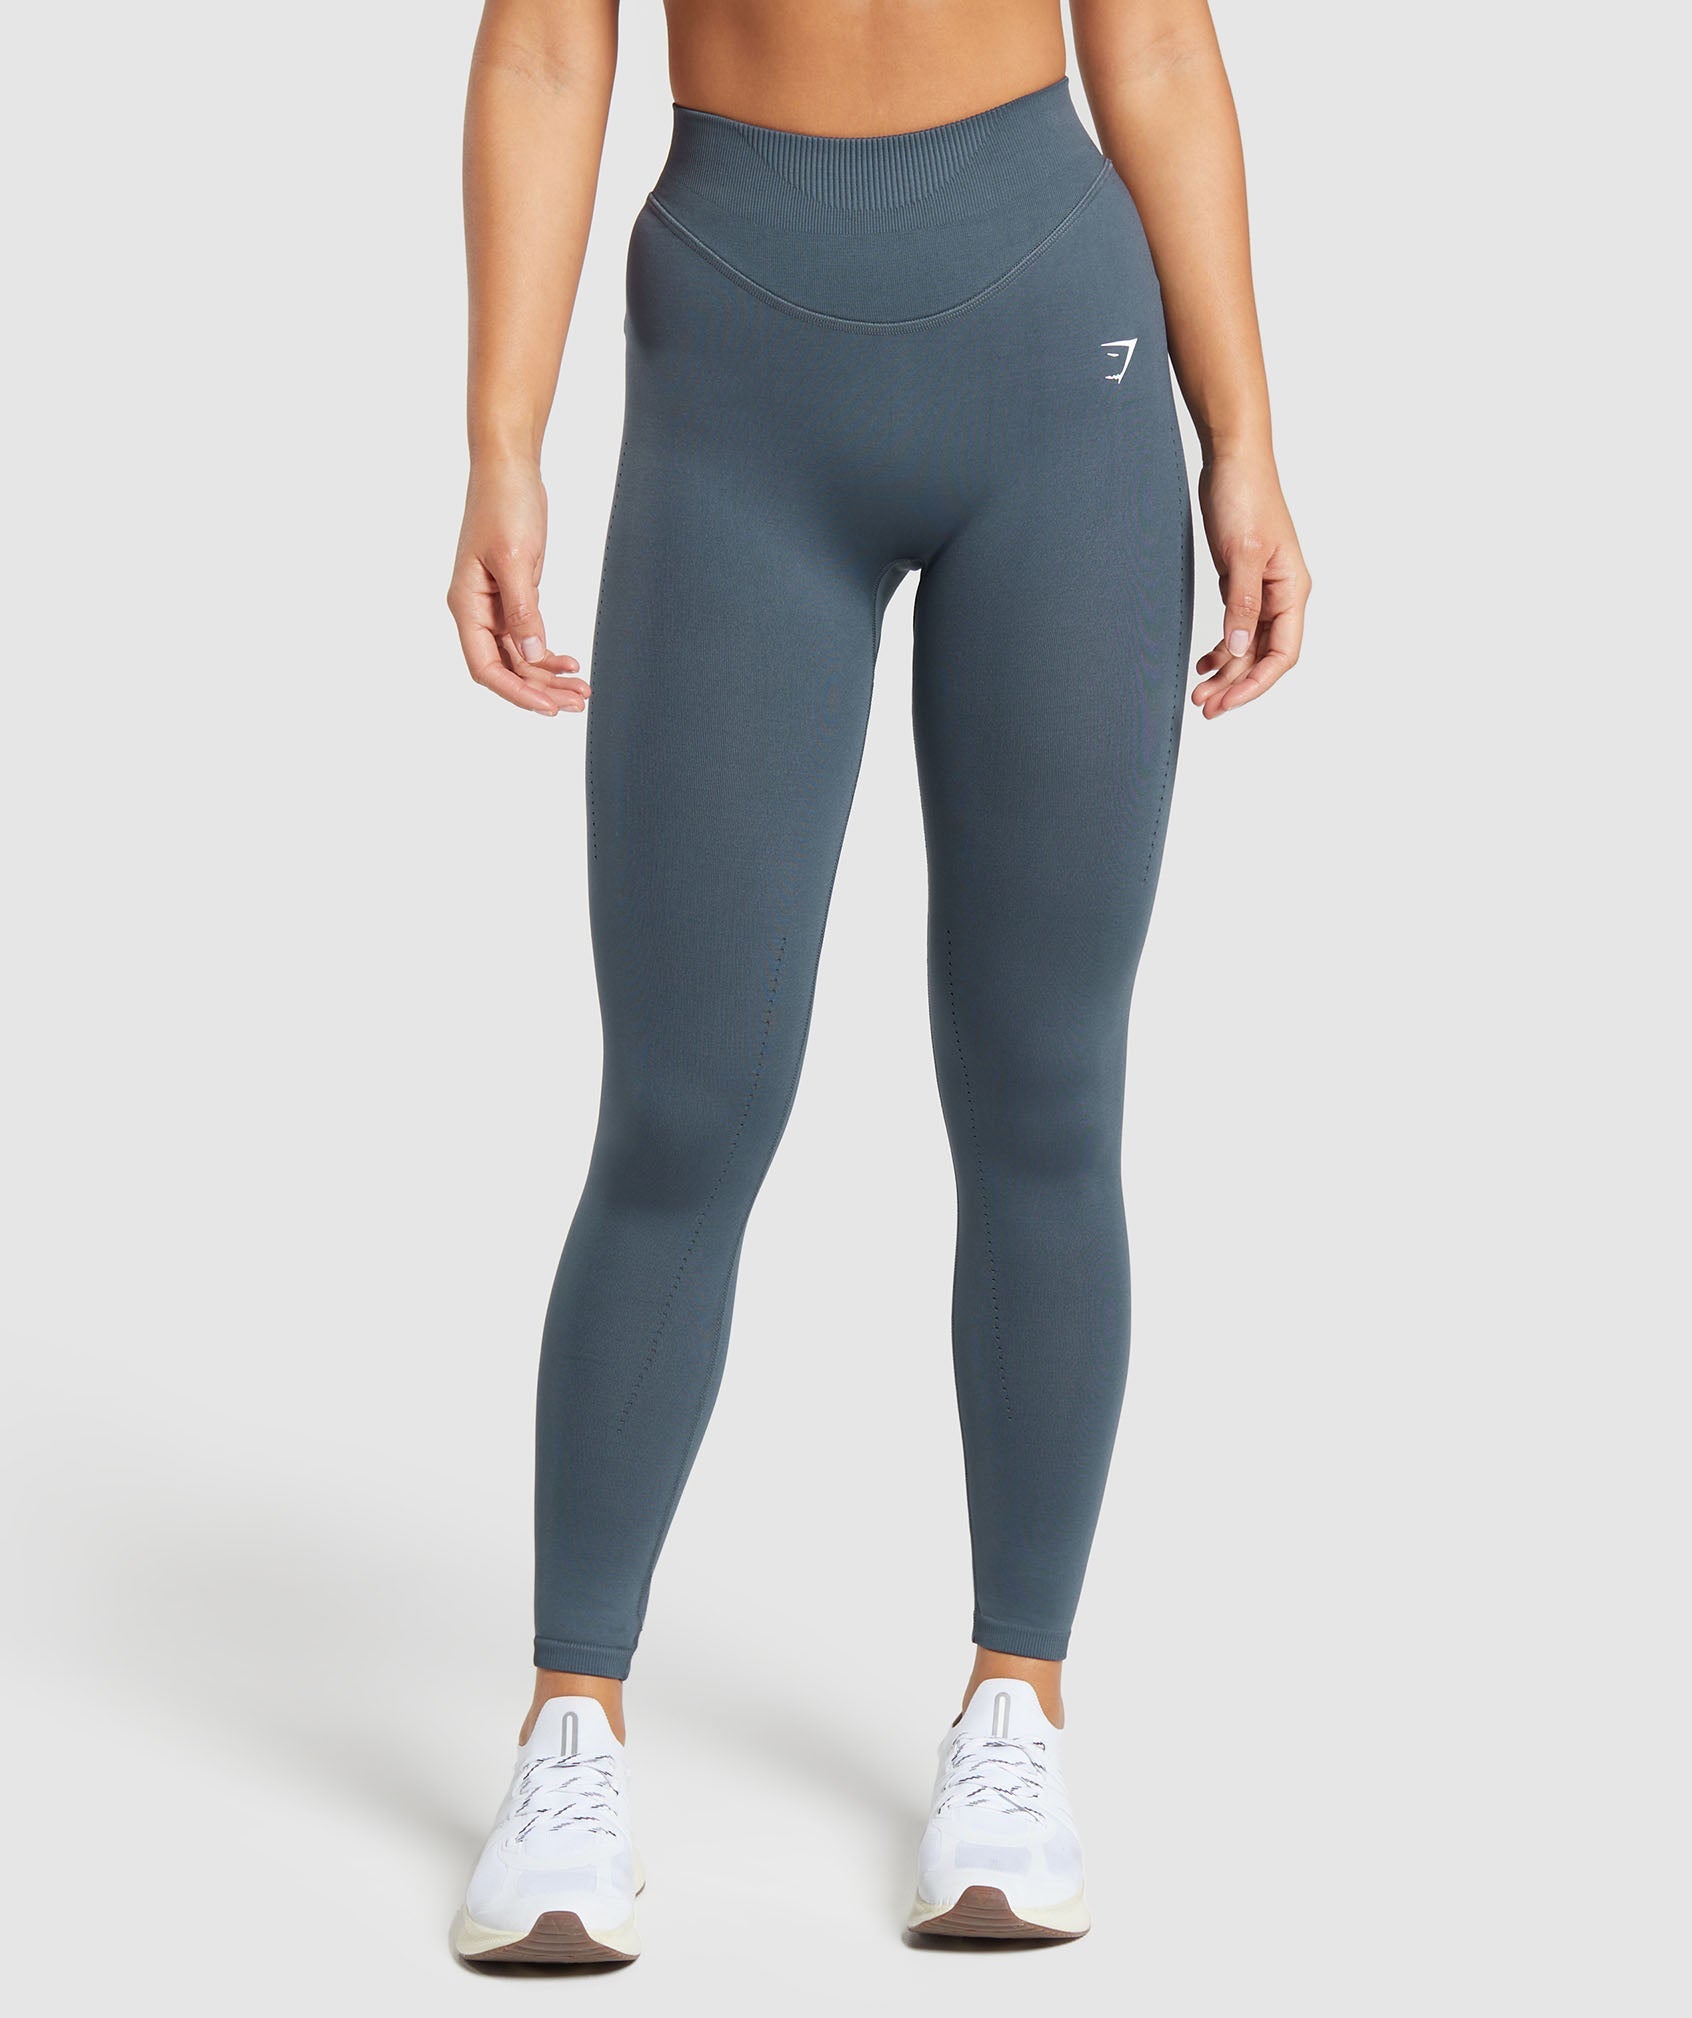 Gymshark Energy Seamless Leggings BLUE Holes/Perforated Sz XS Extra Small